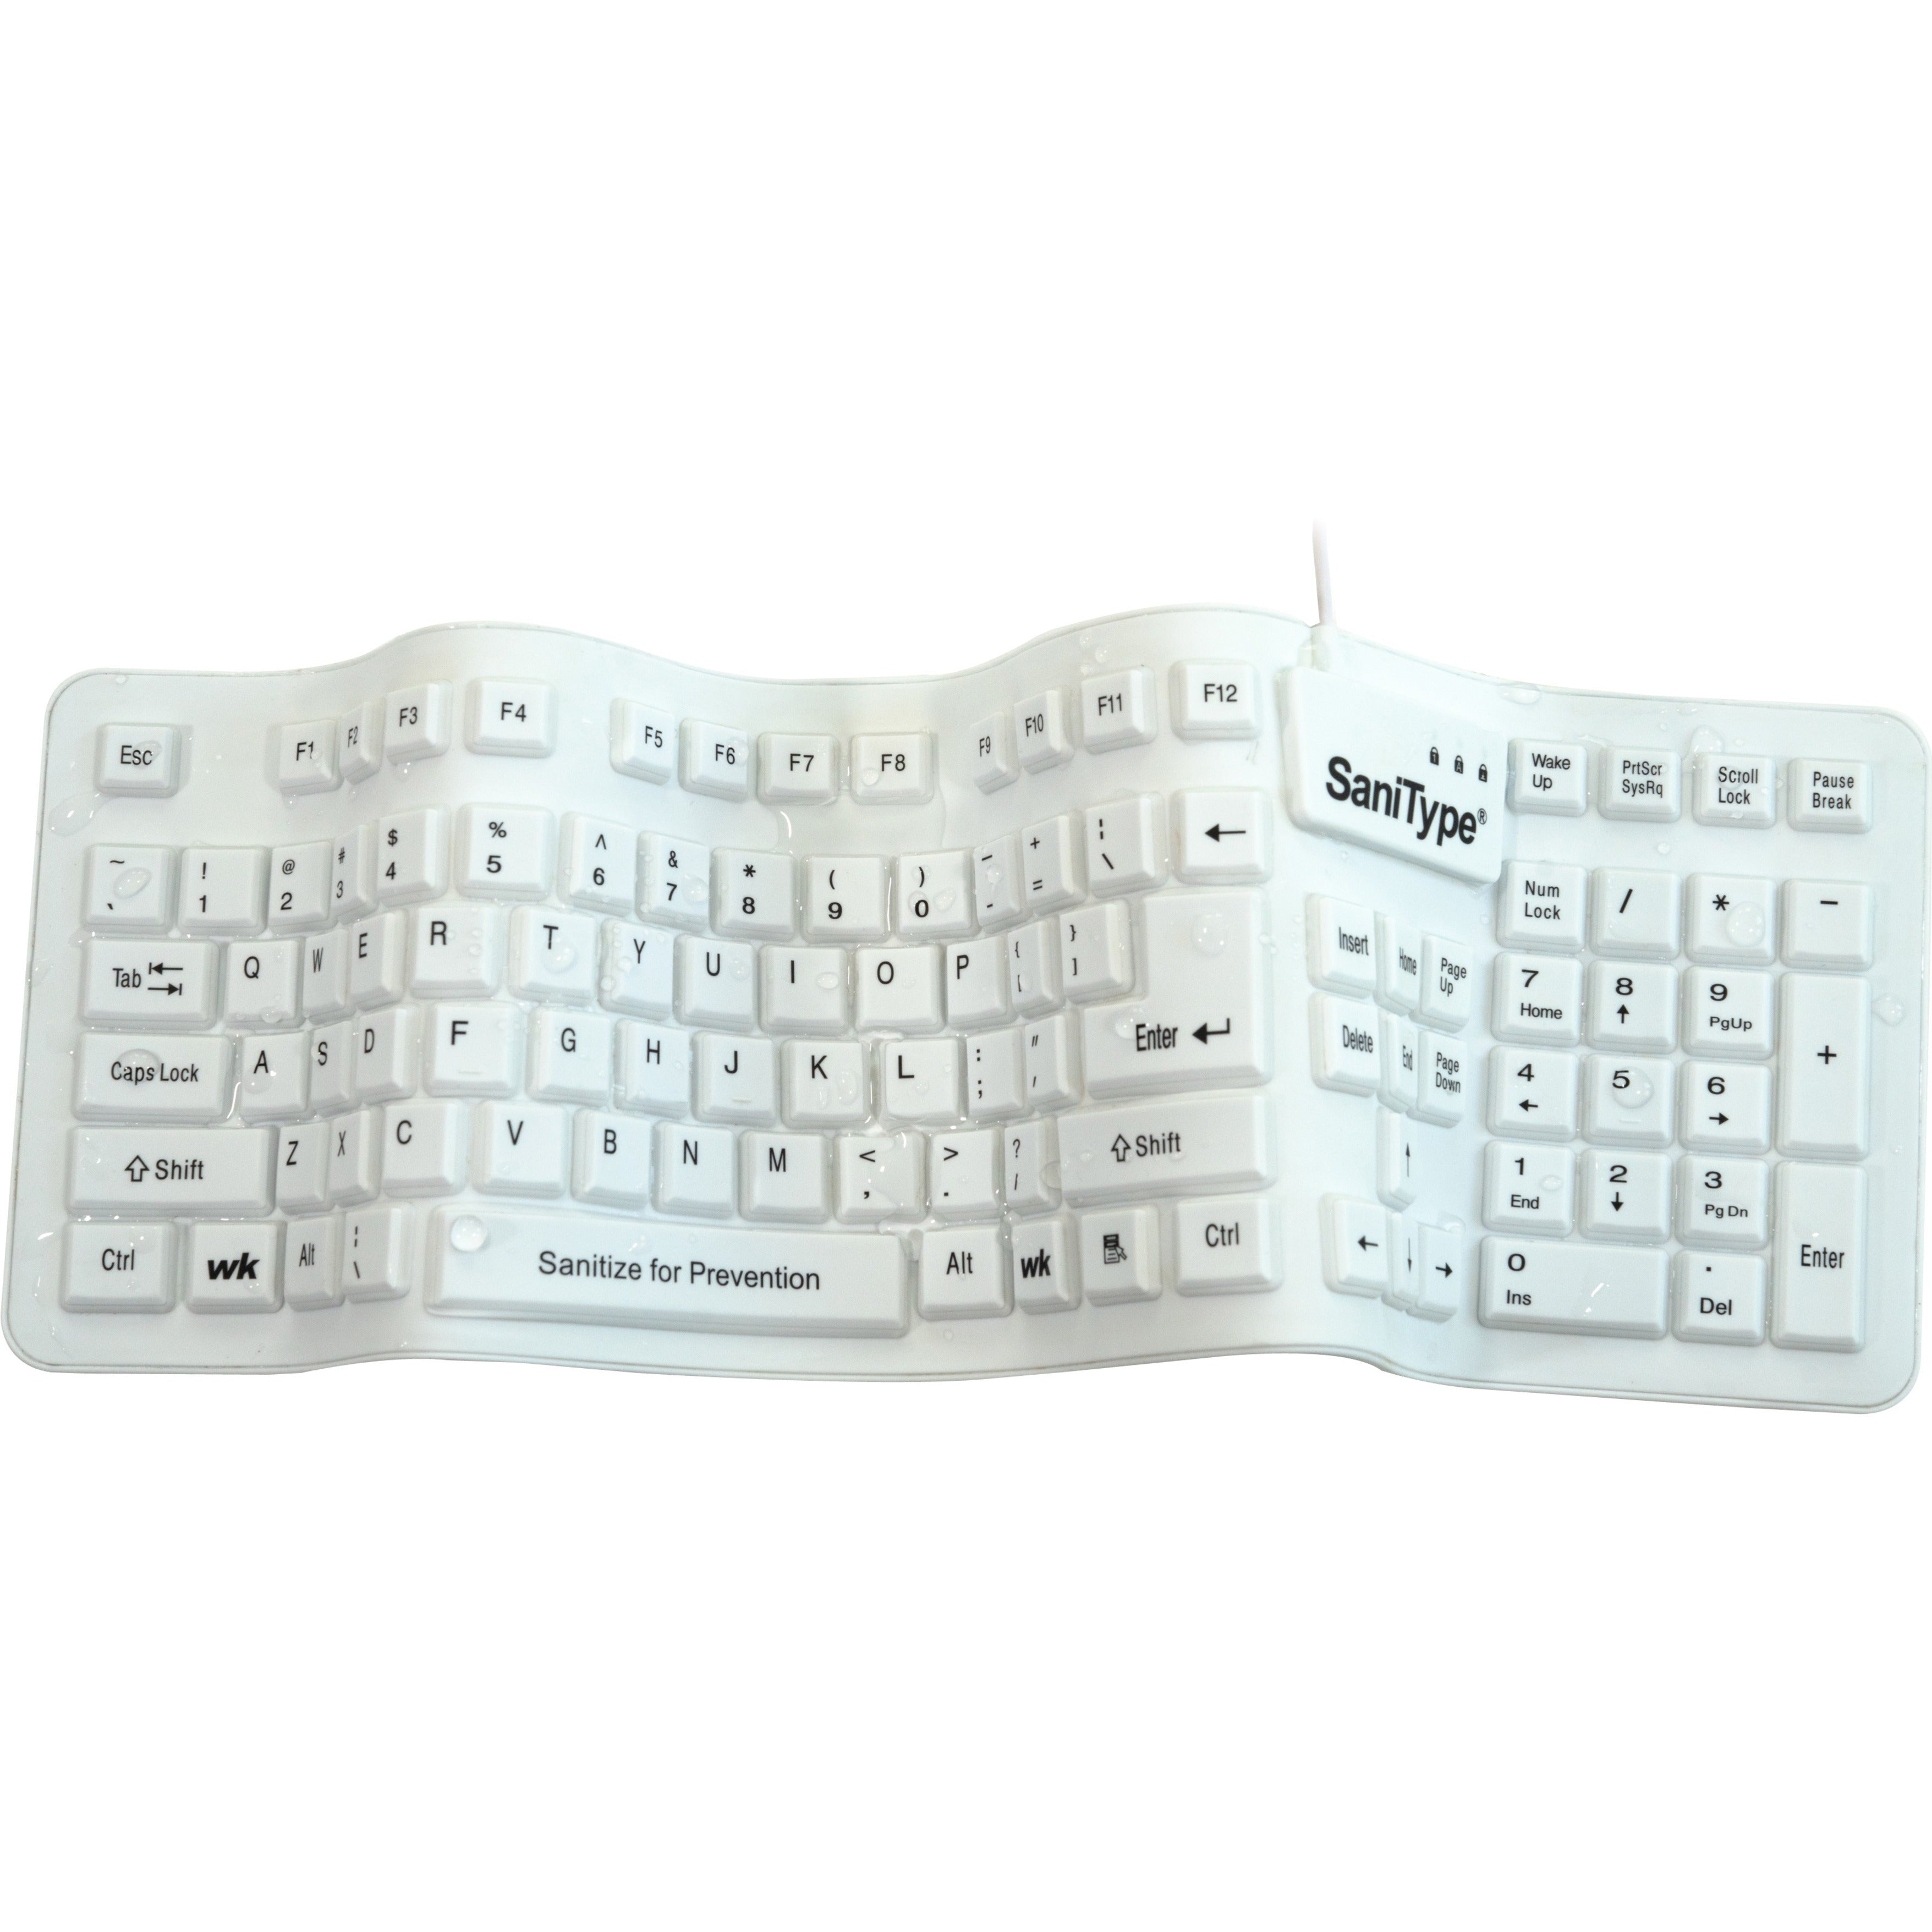 SaniType KBSTFC106-W SaniType Washable Soft-touch Comfort Hygienic Keyboard (USB), Waterproof, Insoft-touch Comfortin W